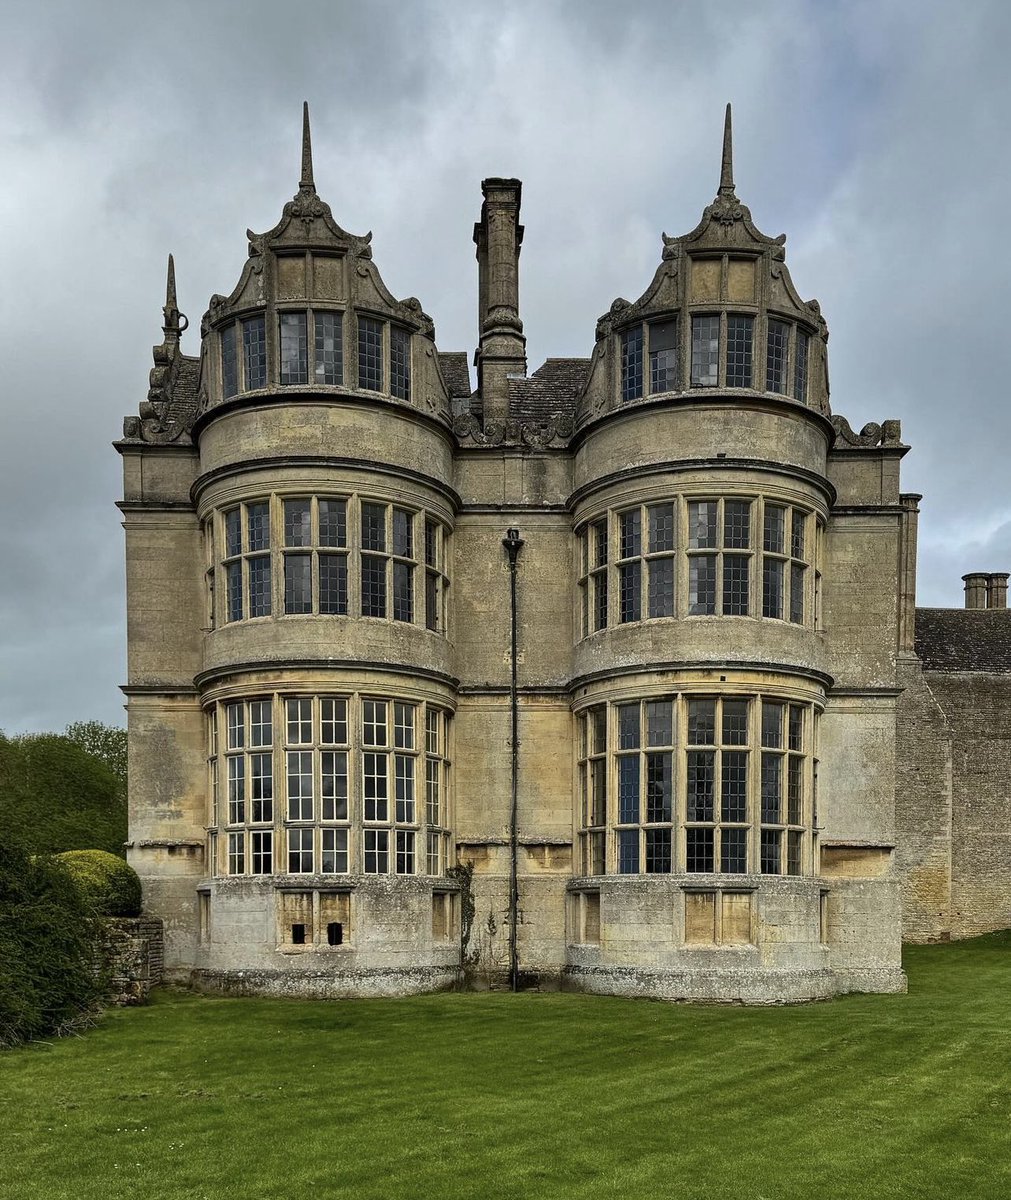 Cool: One of the great Elizabethan houses of England, Kirby Hall was built in 1570 for Sir Humphrey Stafford of Blatherwick